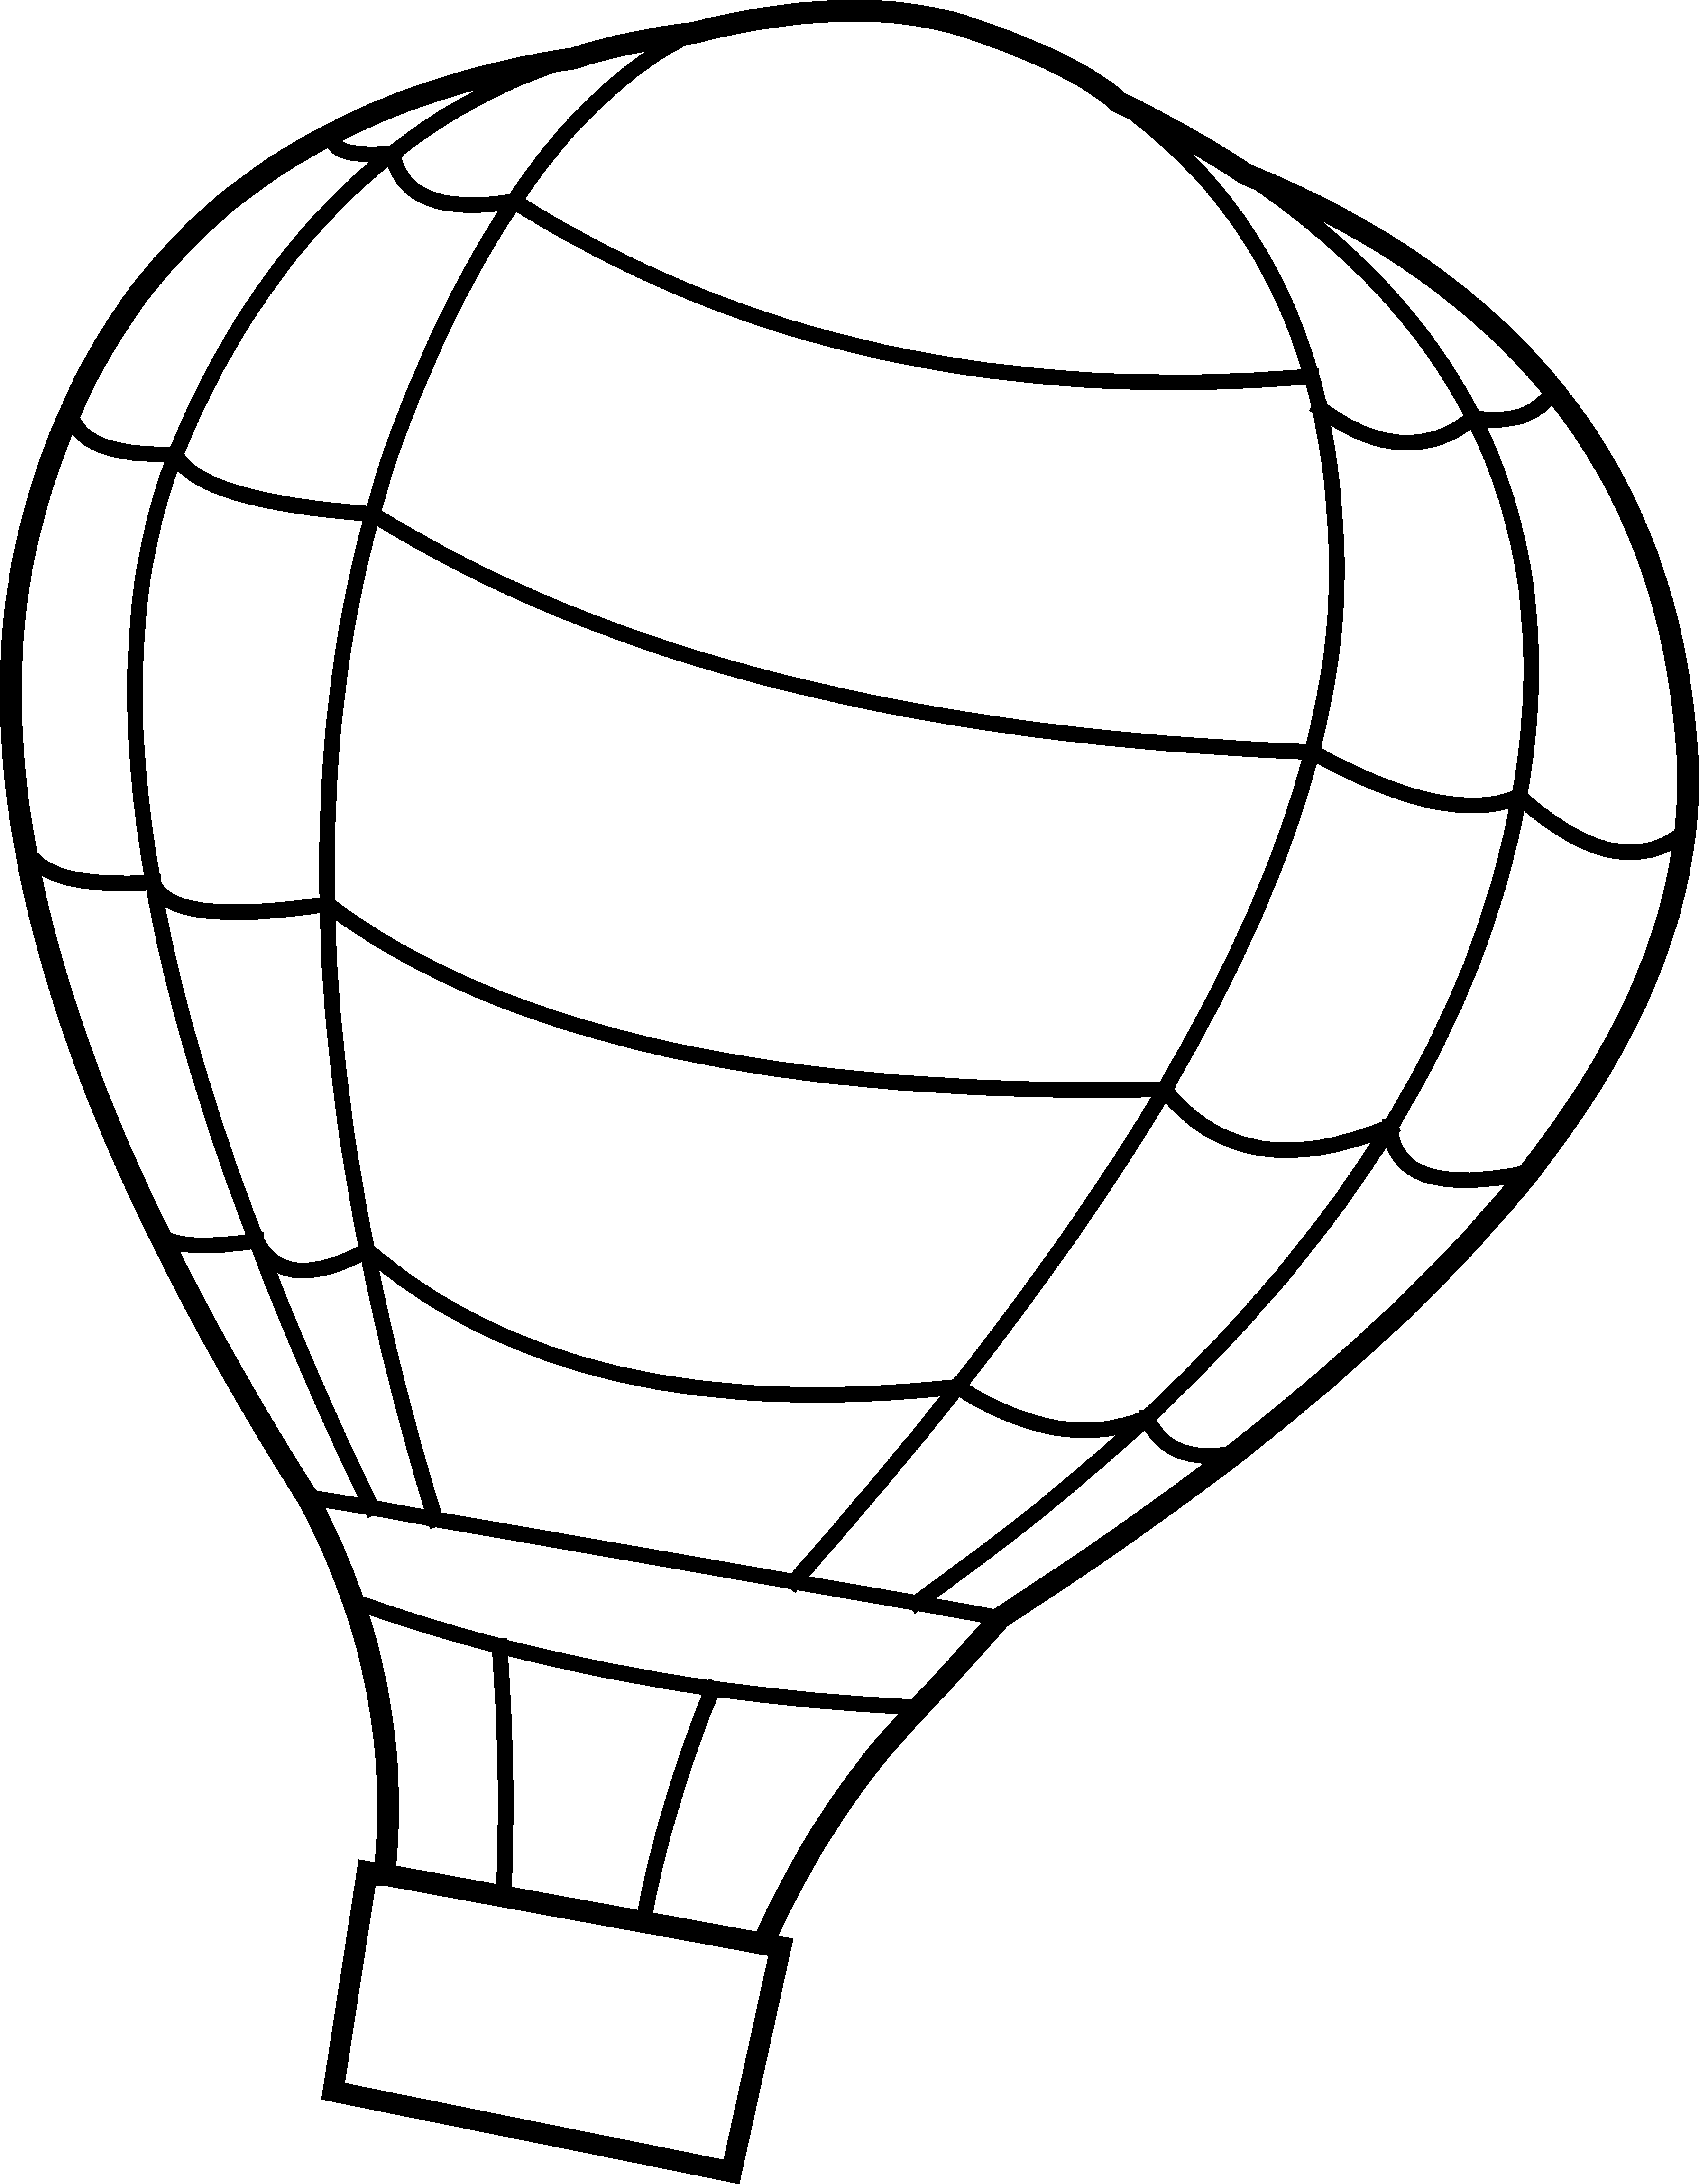 Hearts clipart hot air balloon. Outline png p xeles